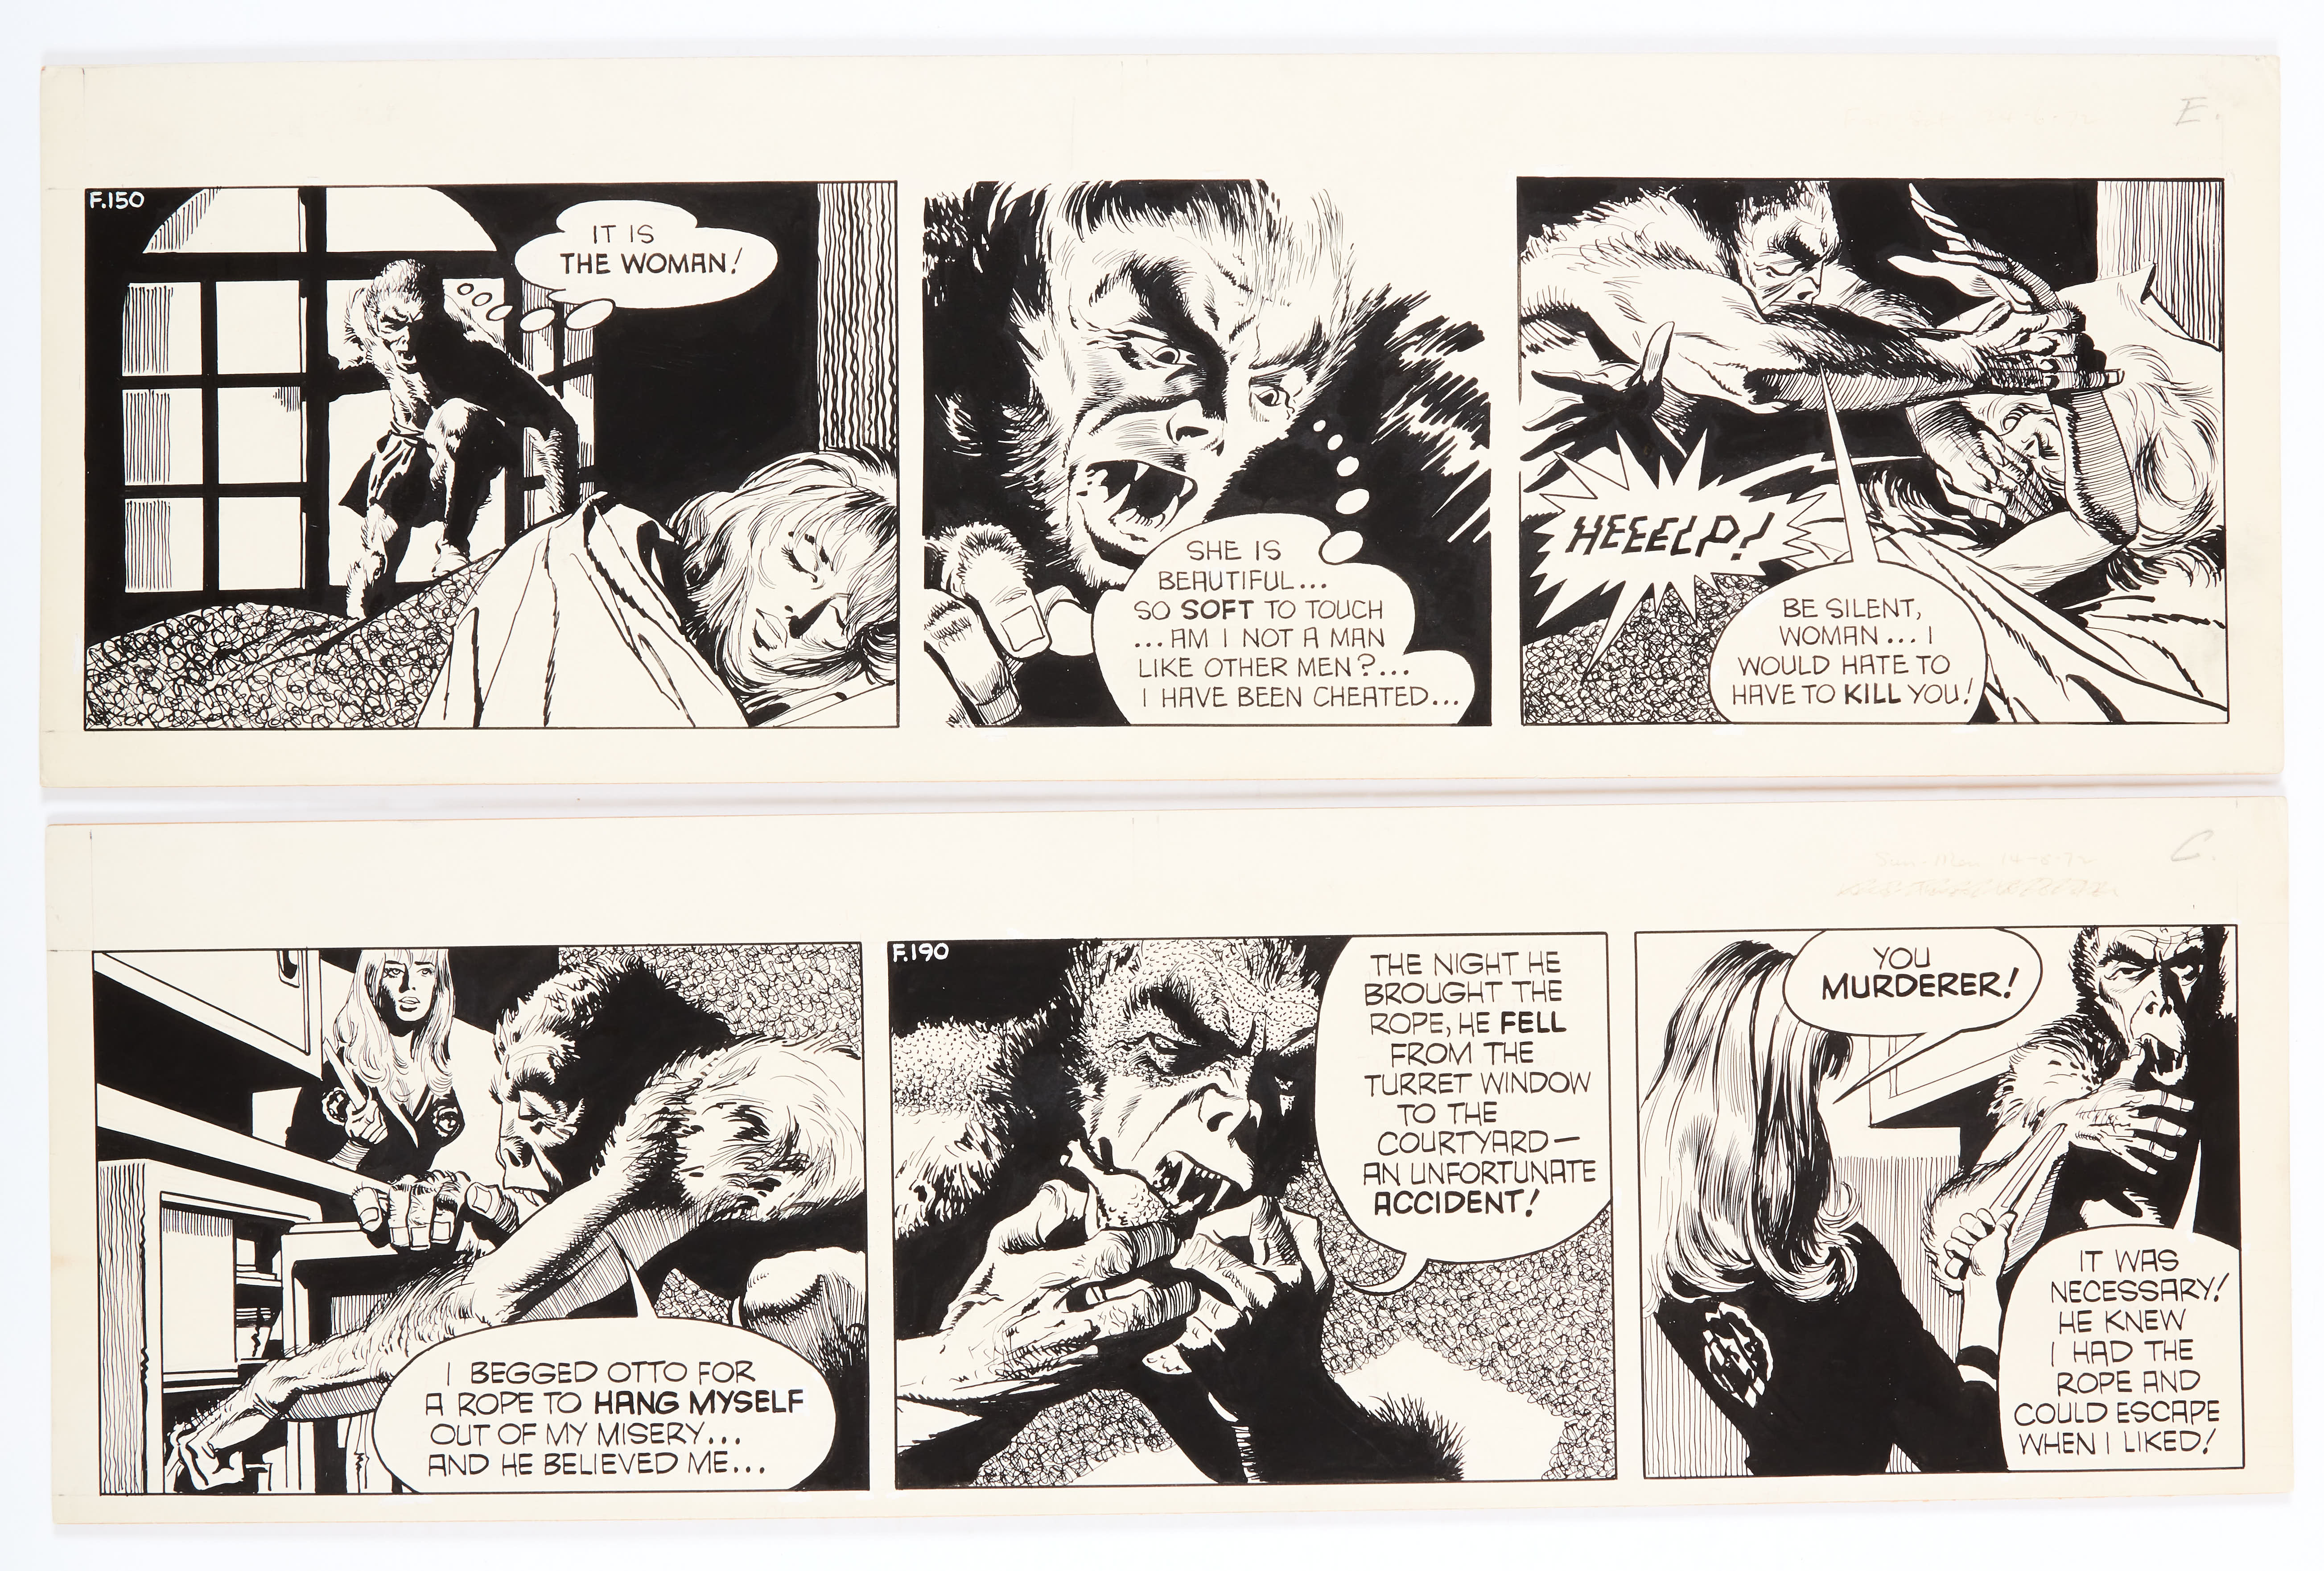 Garth's 'Wolfman of Ausensee' two original artworks (1972) by Frank Bellamy for The D. Mirror 24.